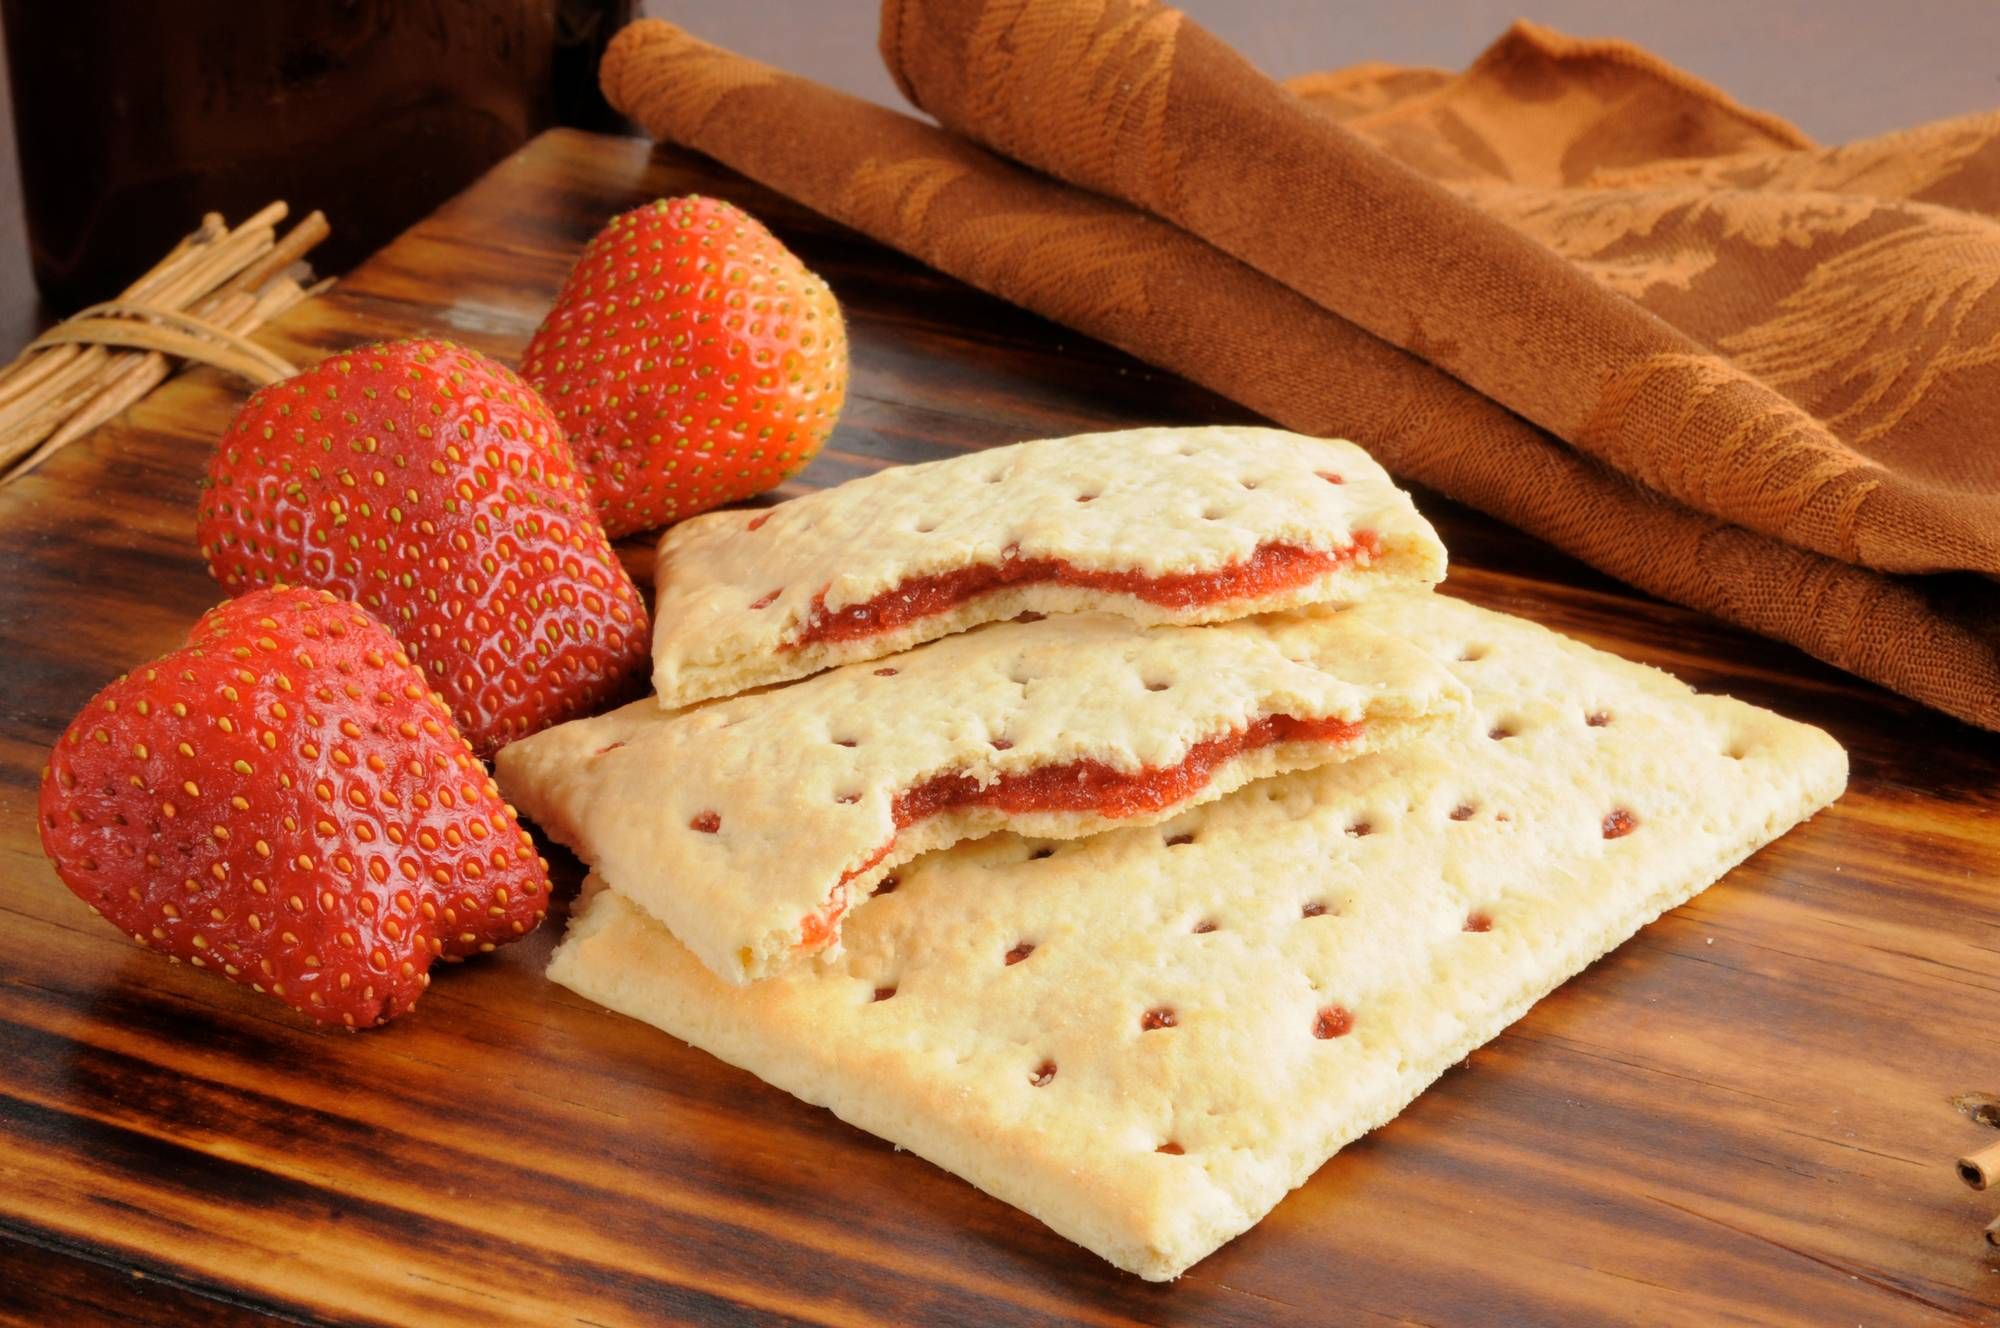 Strawberry Pop-Tarts ingredients are allegedly misleading.